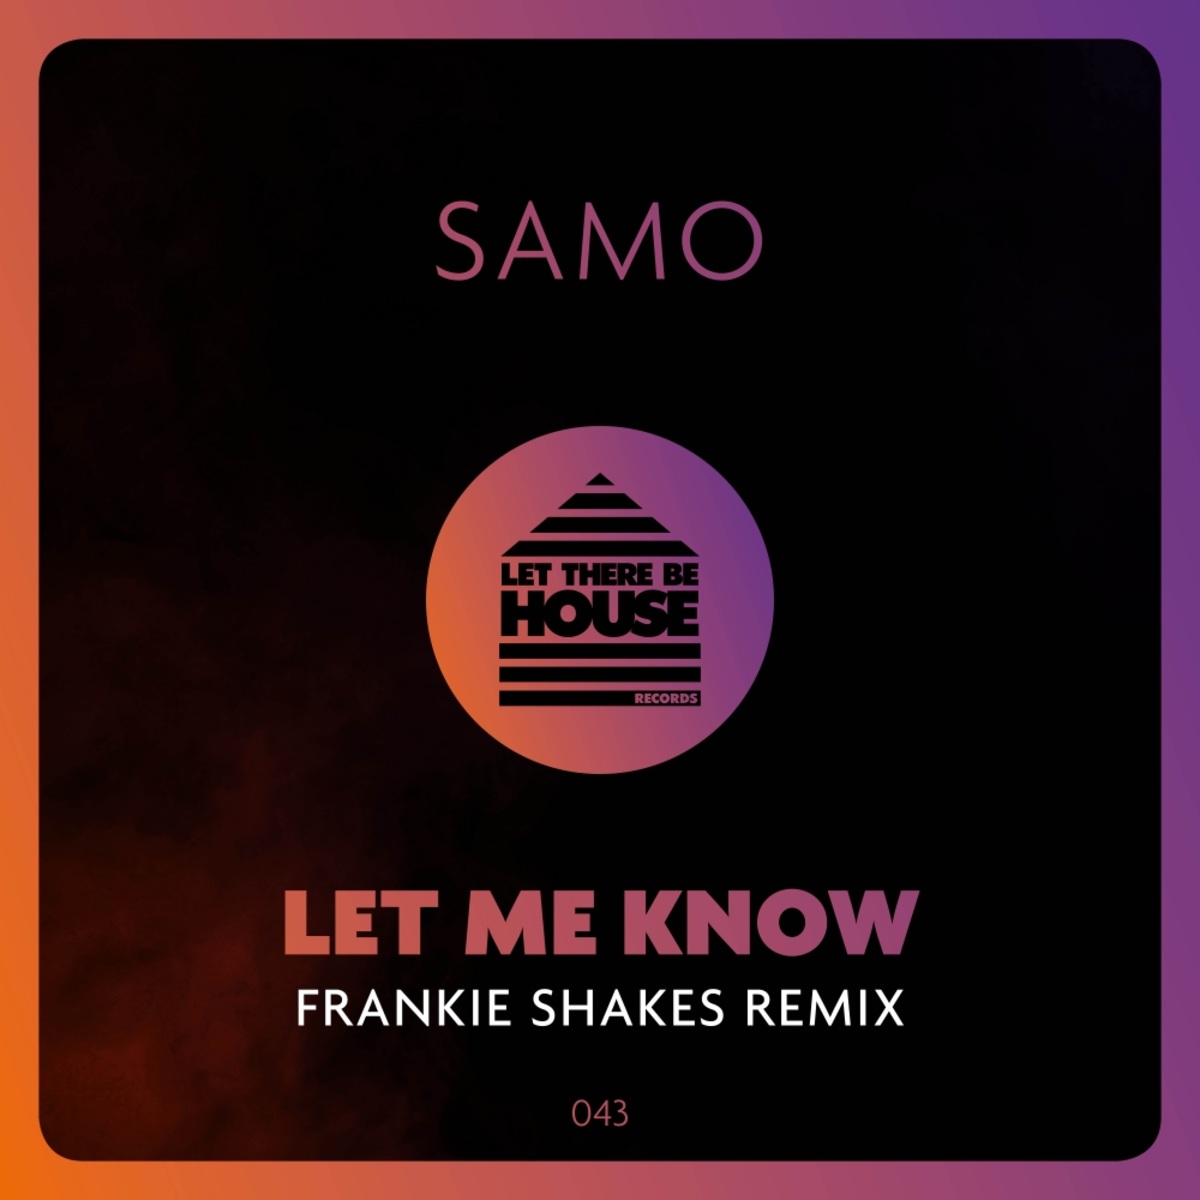 Samo - Let Me Know Remix / Let There Be House Records